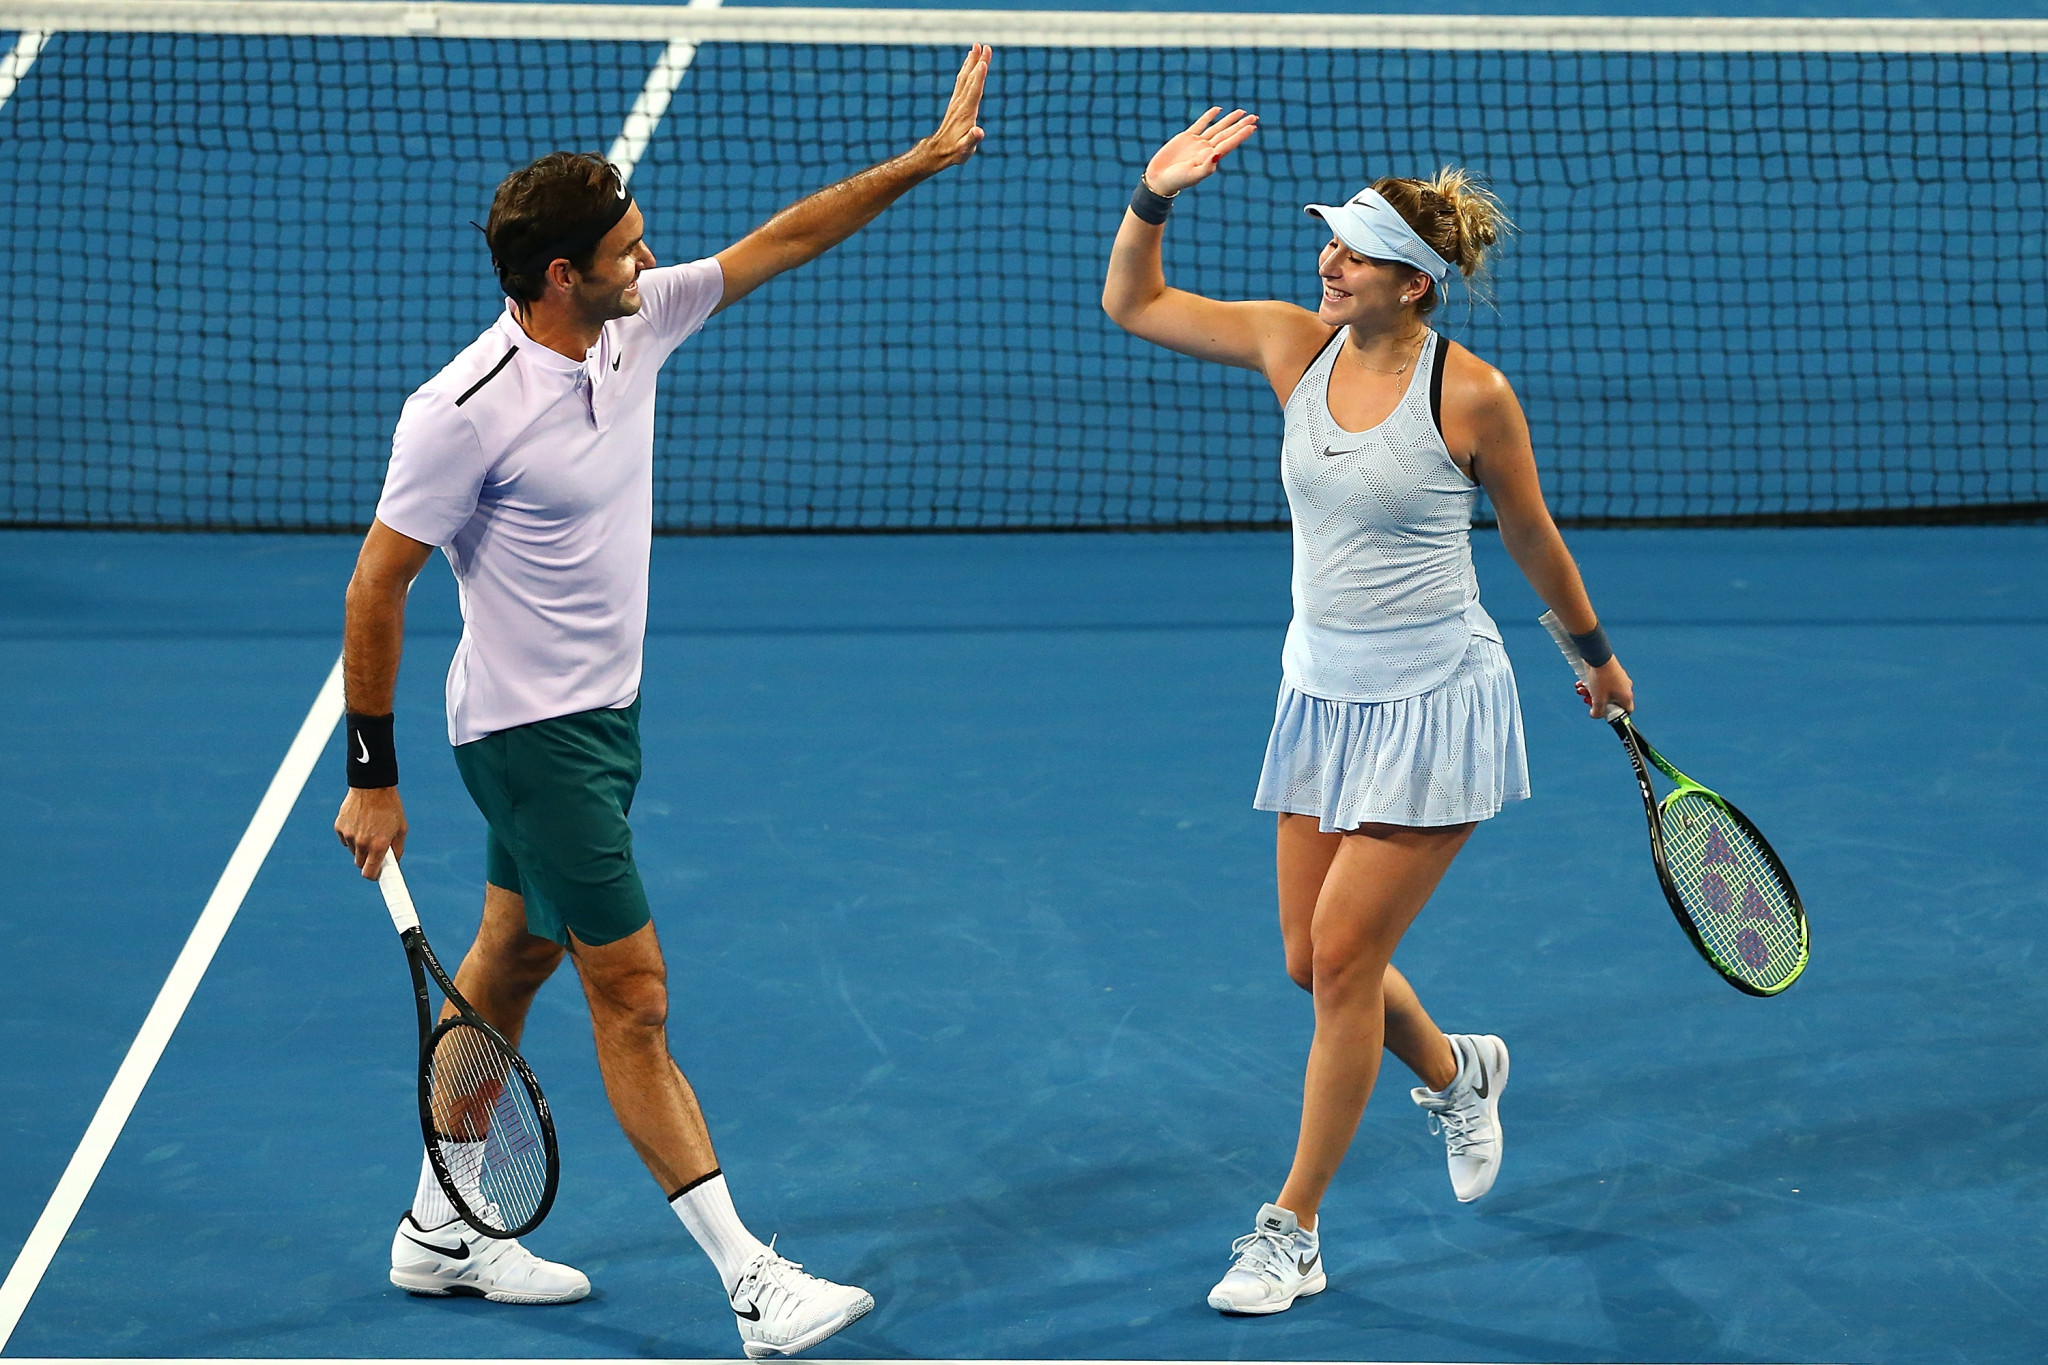 Roger Federer and Belinds Bencic teamed up to win the mixed doubles match to complete a clean sweep for Switzerland ©Getty Images